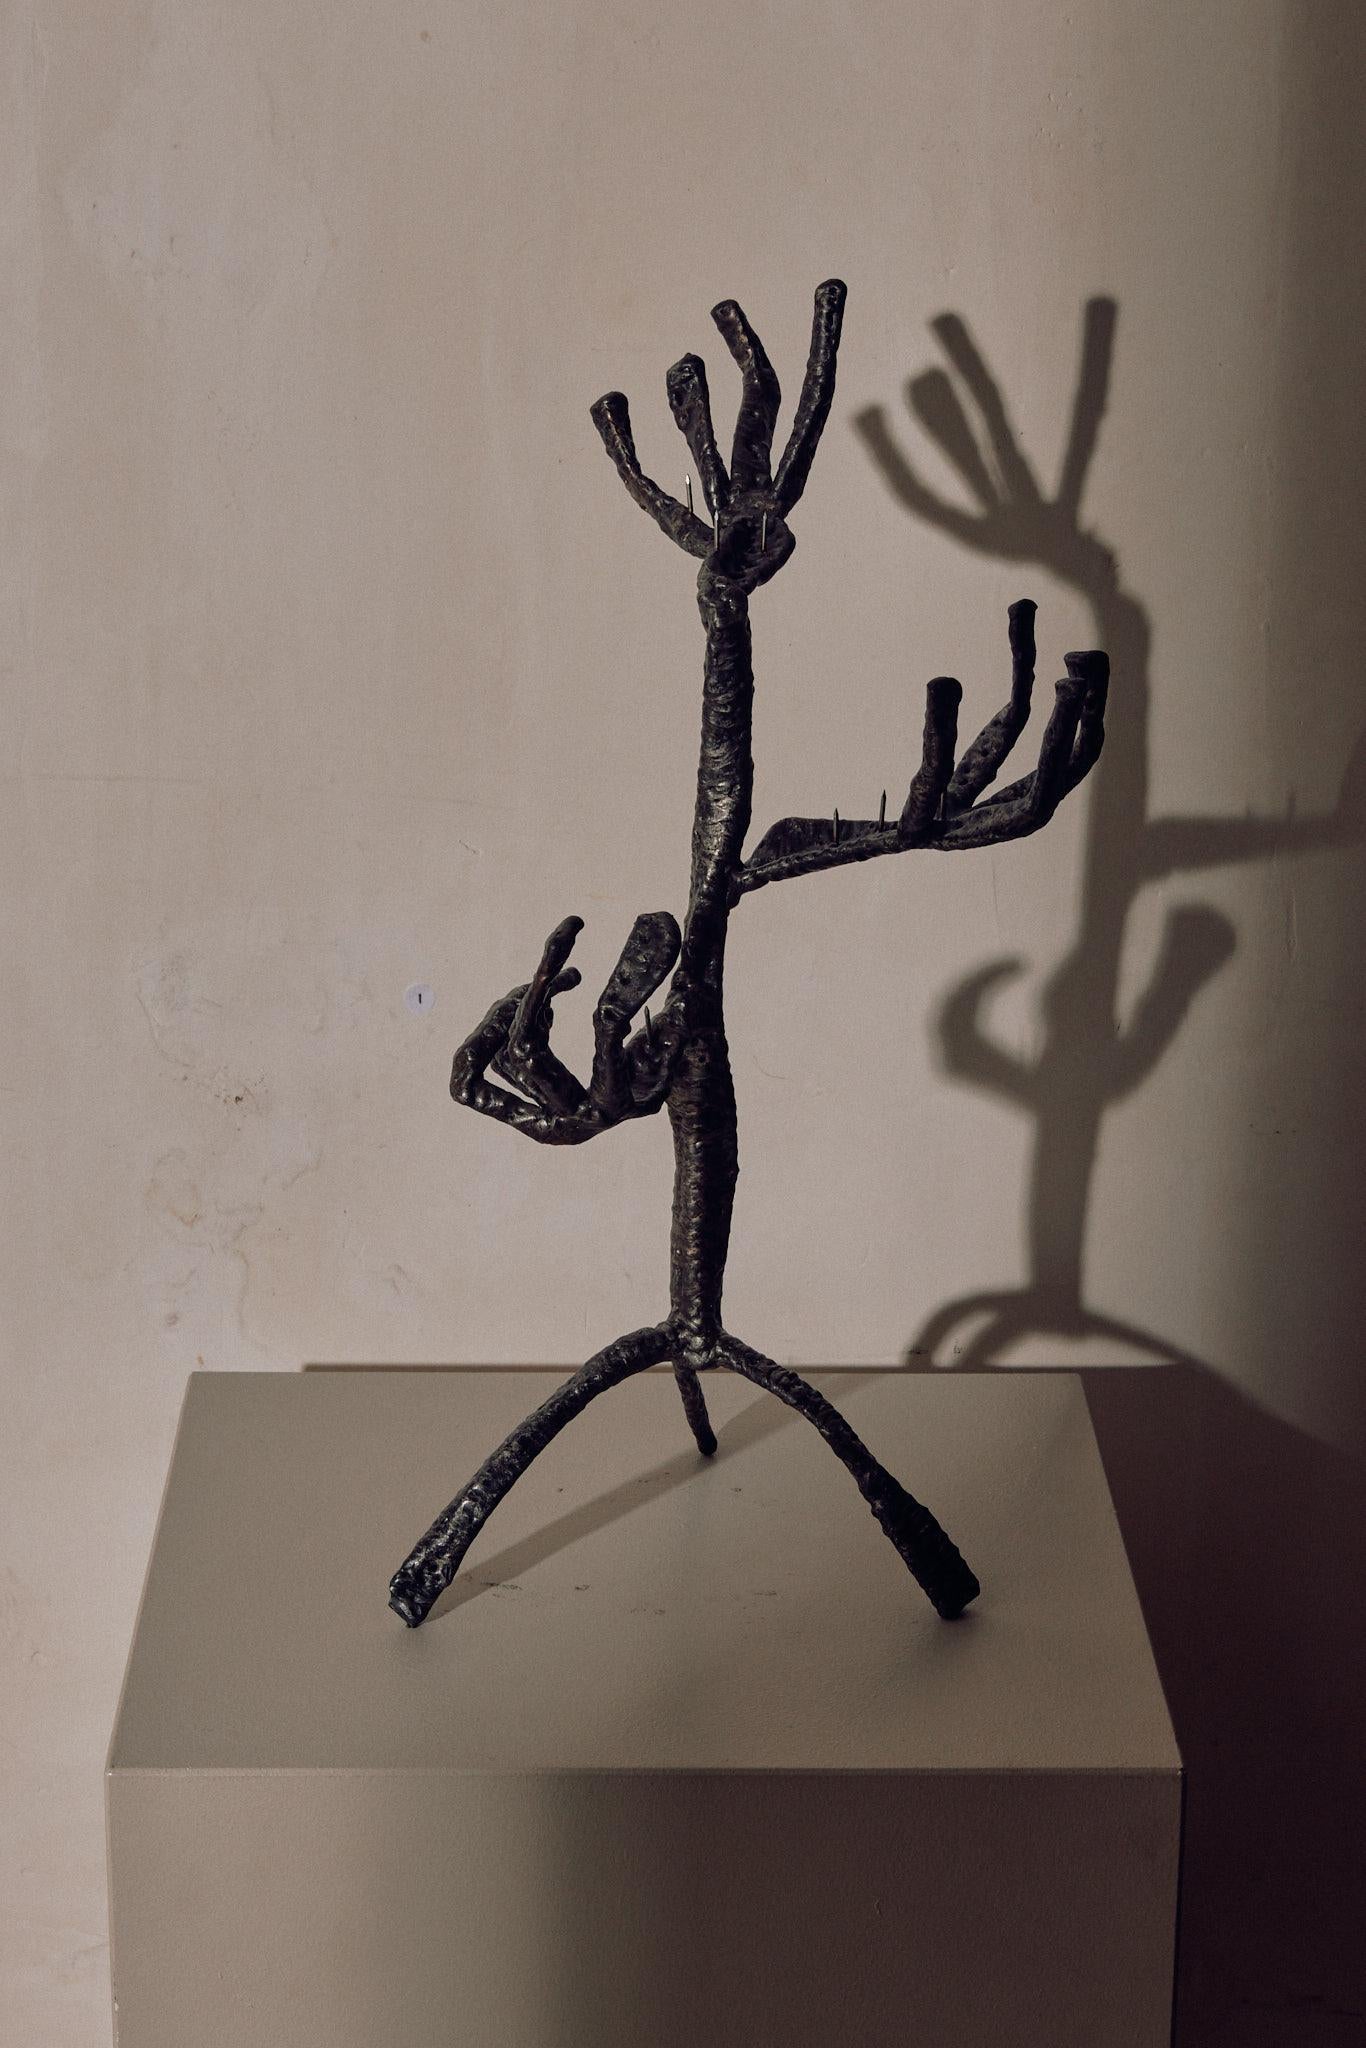 Candelabara 2 cande holder by Michael Gittings
Dimensions: D 50 x W 50 x H 50 cm.
Materials: Stainless steel.

Michael Gittings
Michael Gittings imagines with his hands. Since establishing his studio in 2016, the Melbourne based designer and